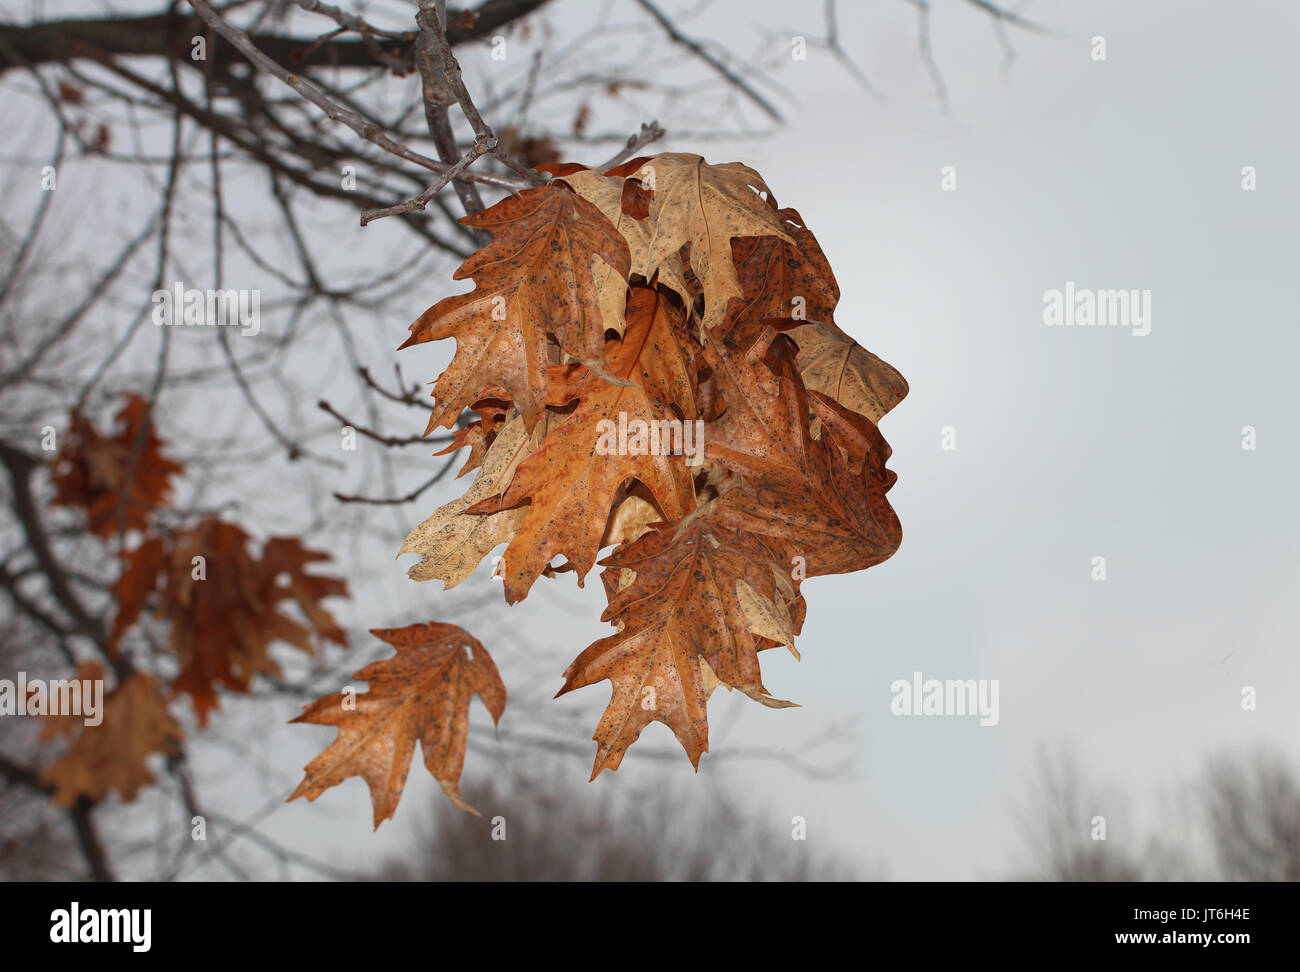 Sorrow and solitude concept as a group of old weathered leaves in autumn shaped as a human head as a sadness symbol in a 3D illustration style. Stock Photo